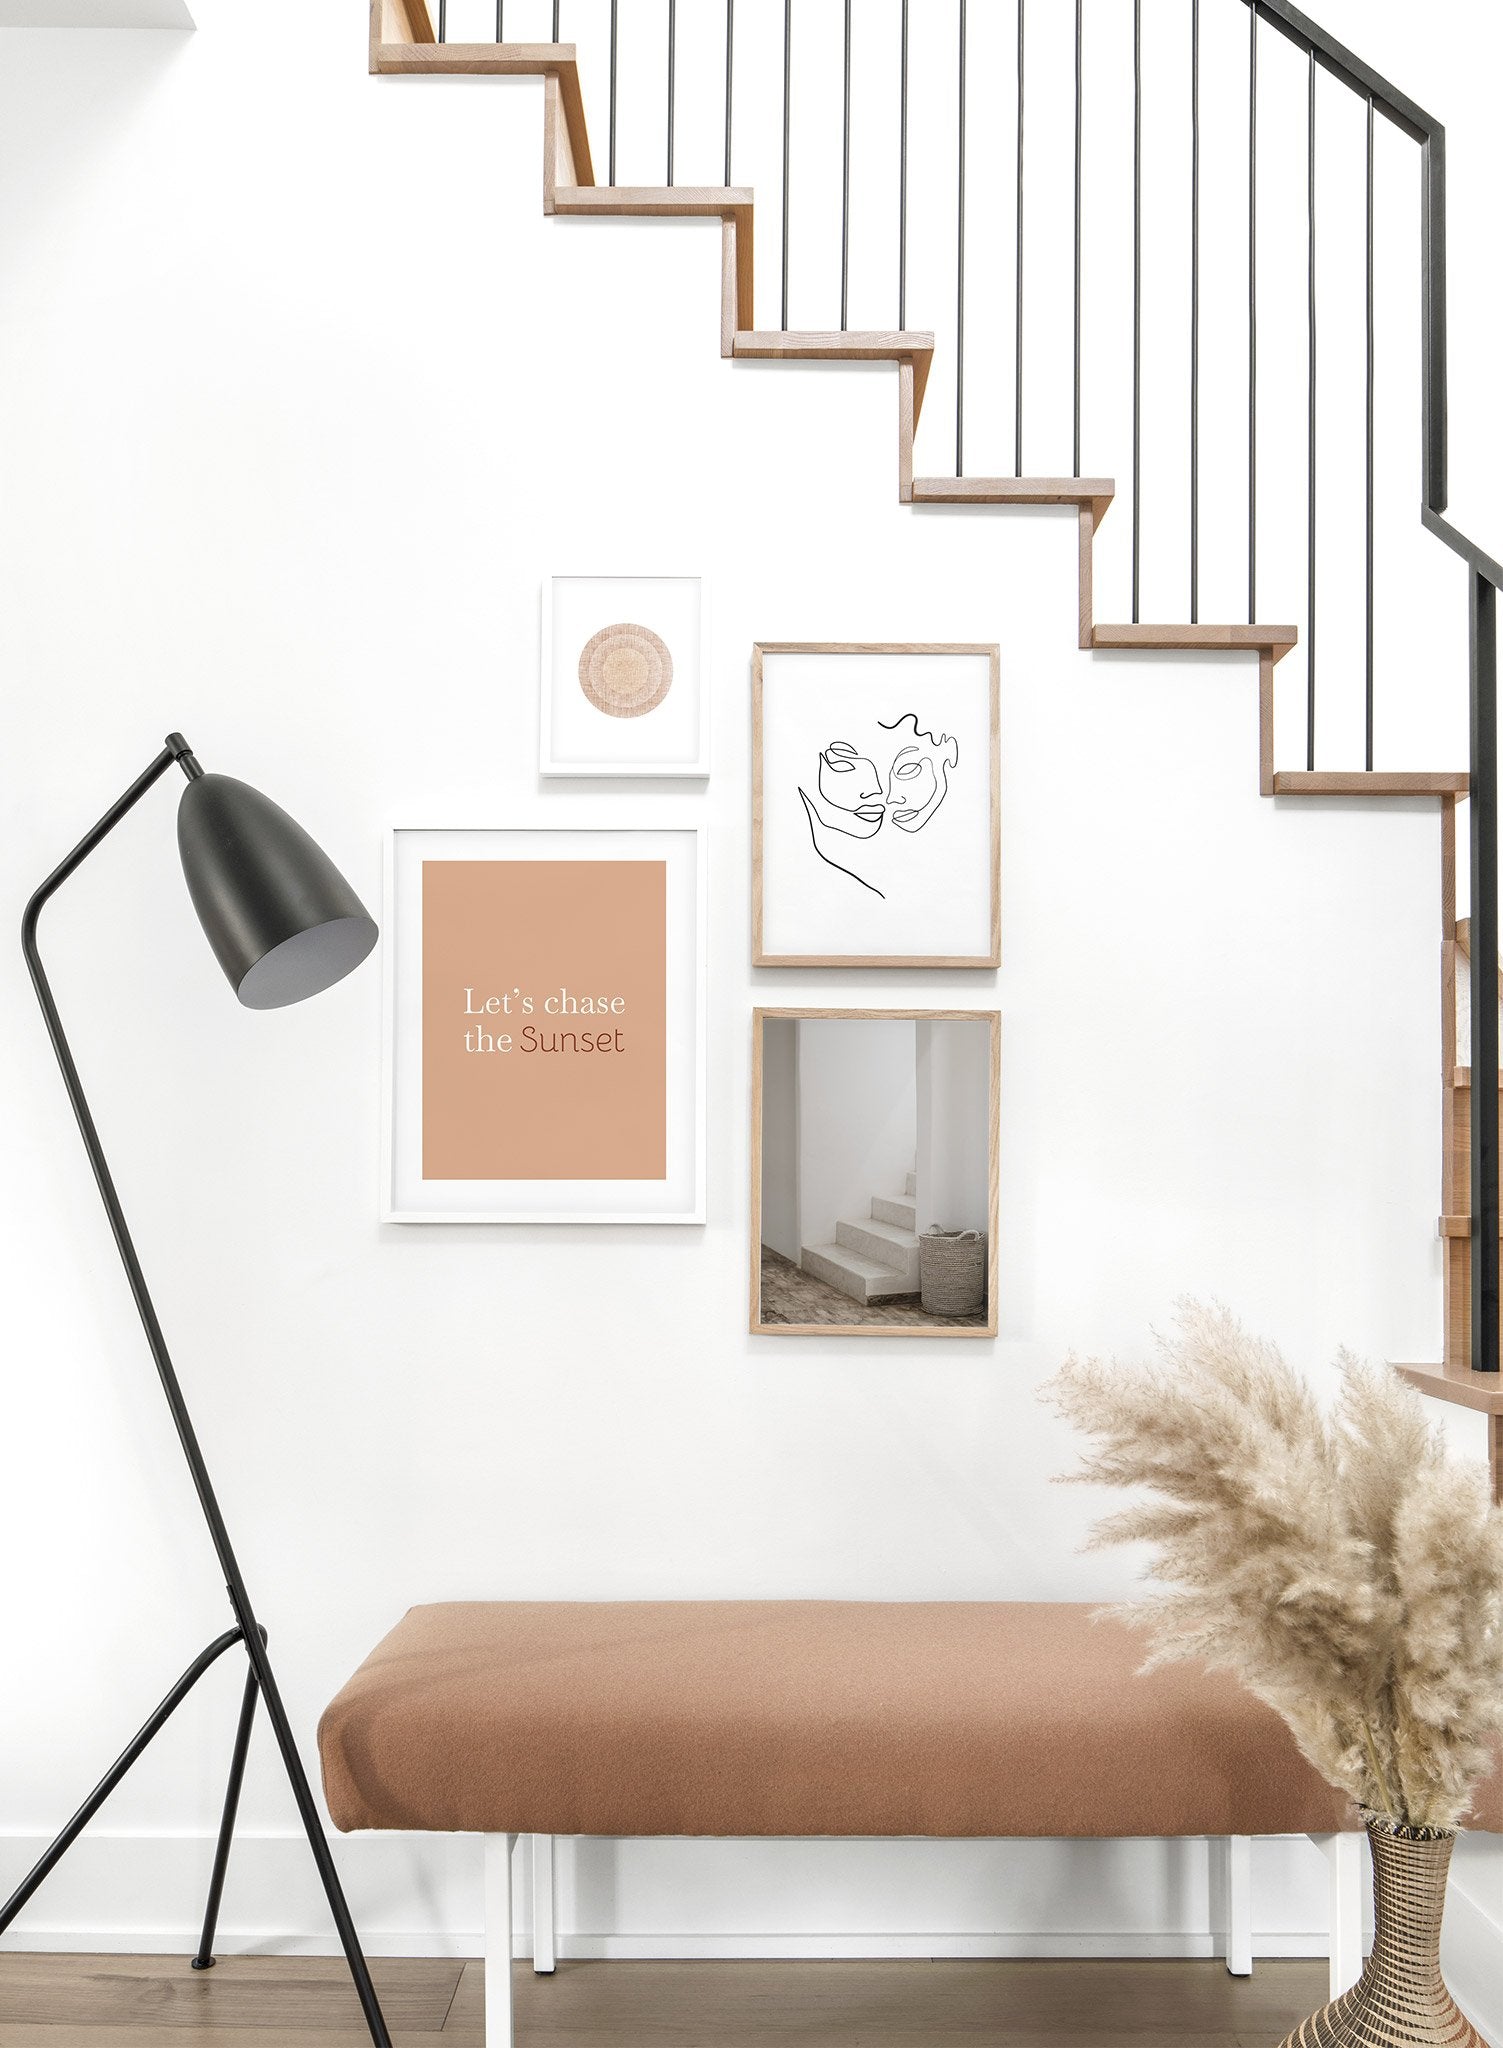 Modern minimalist typography poster by Opposite Wall with Let's Chase the Sunset in orange - Lifestyle Quad - Entryway